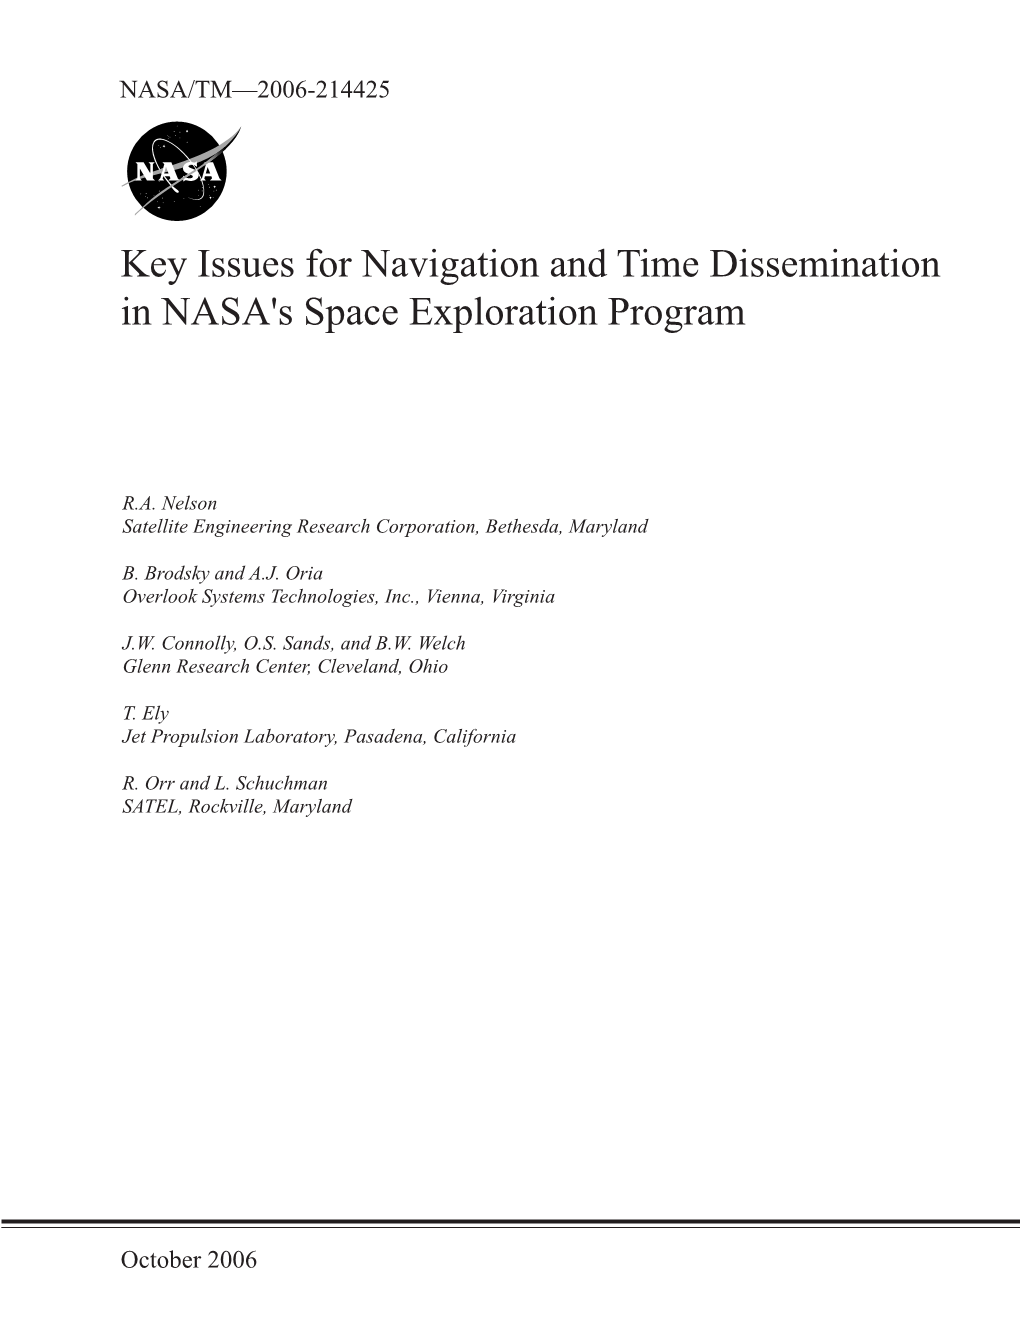 Key Issues for Navigation and Time Dissemination in NASA's Space Exploration Program